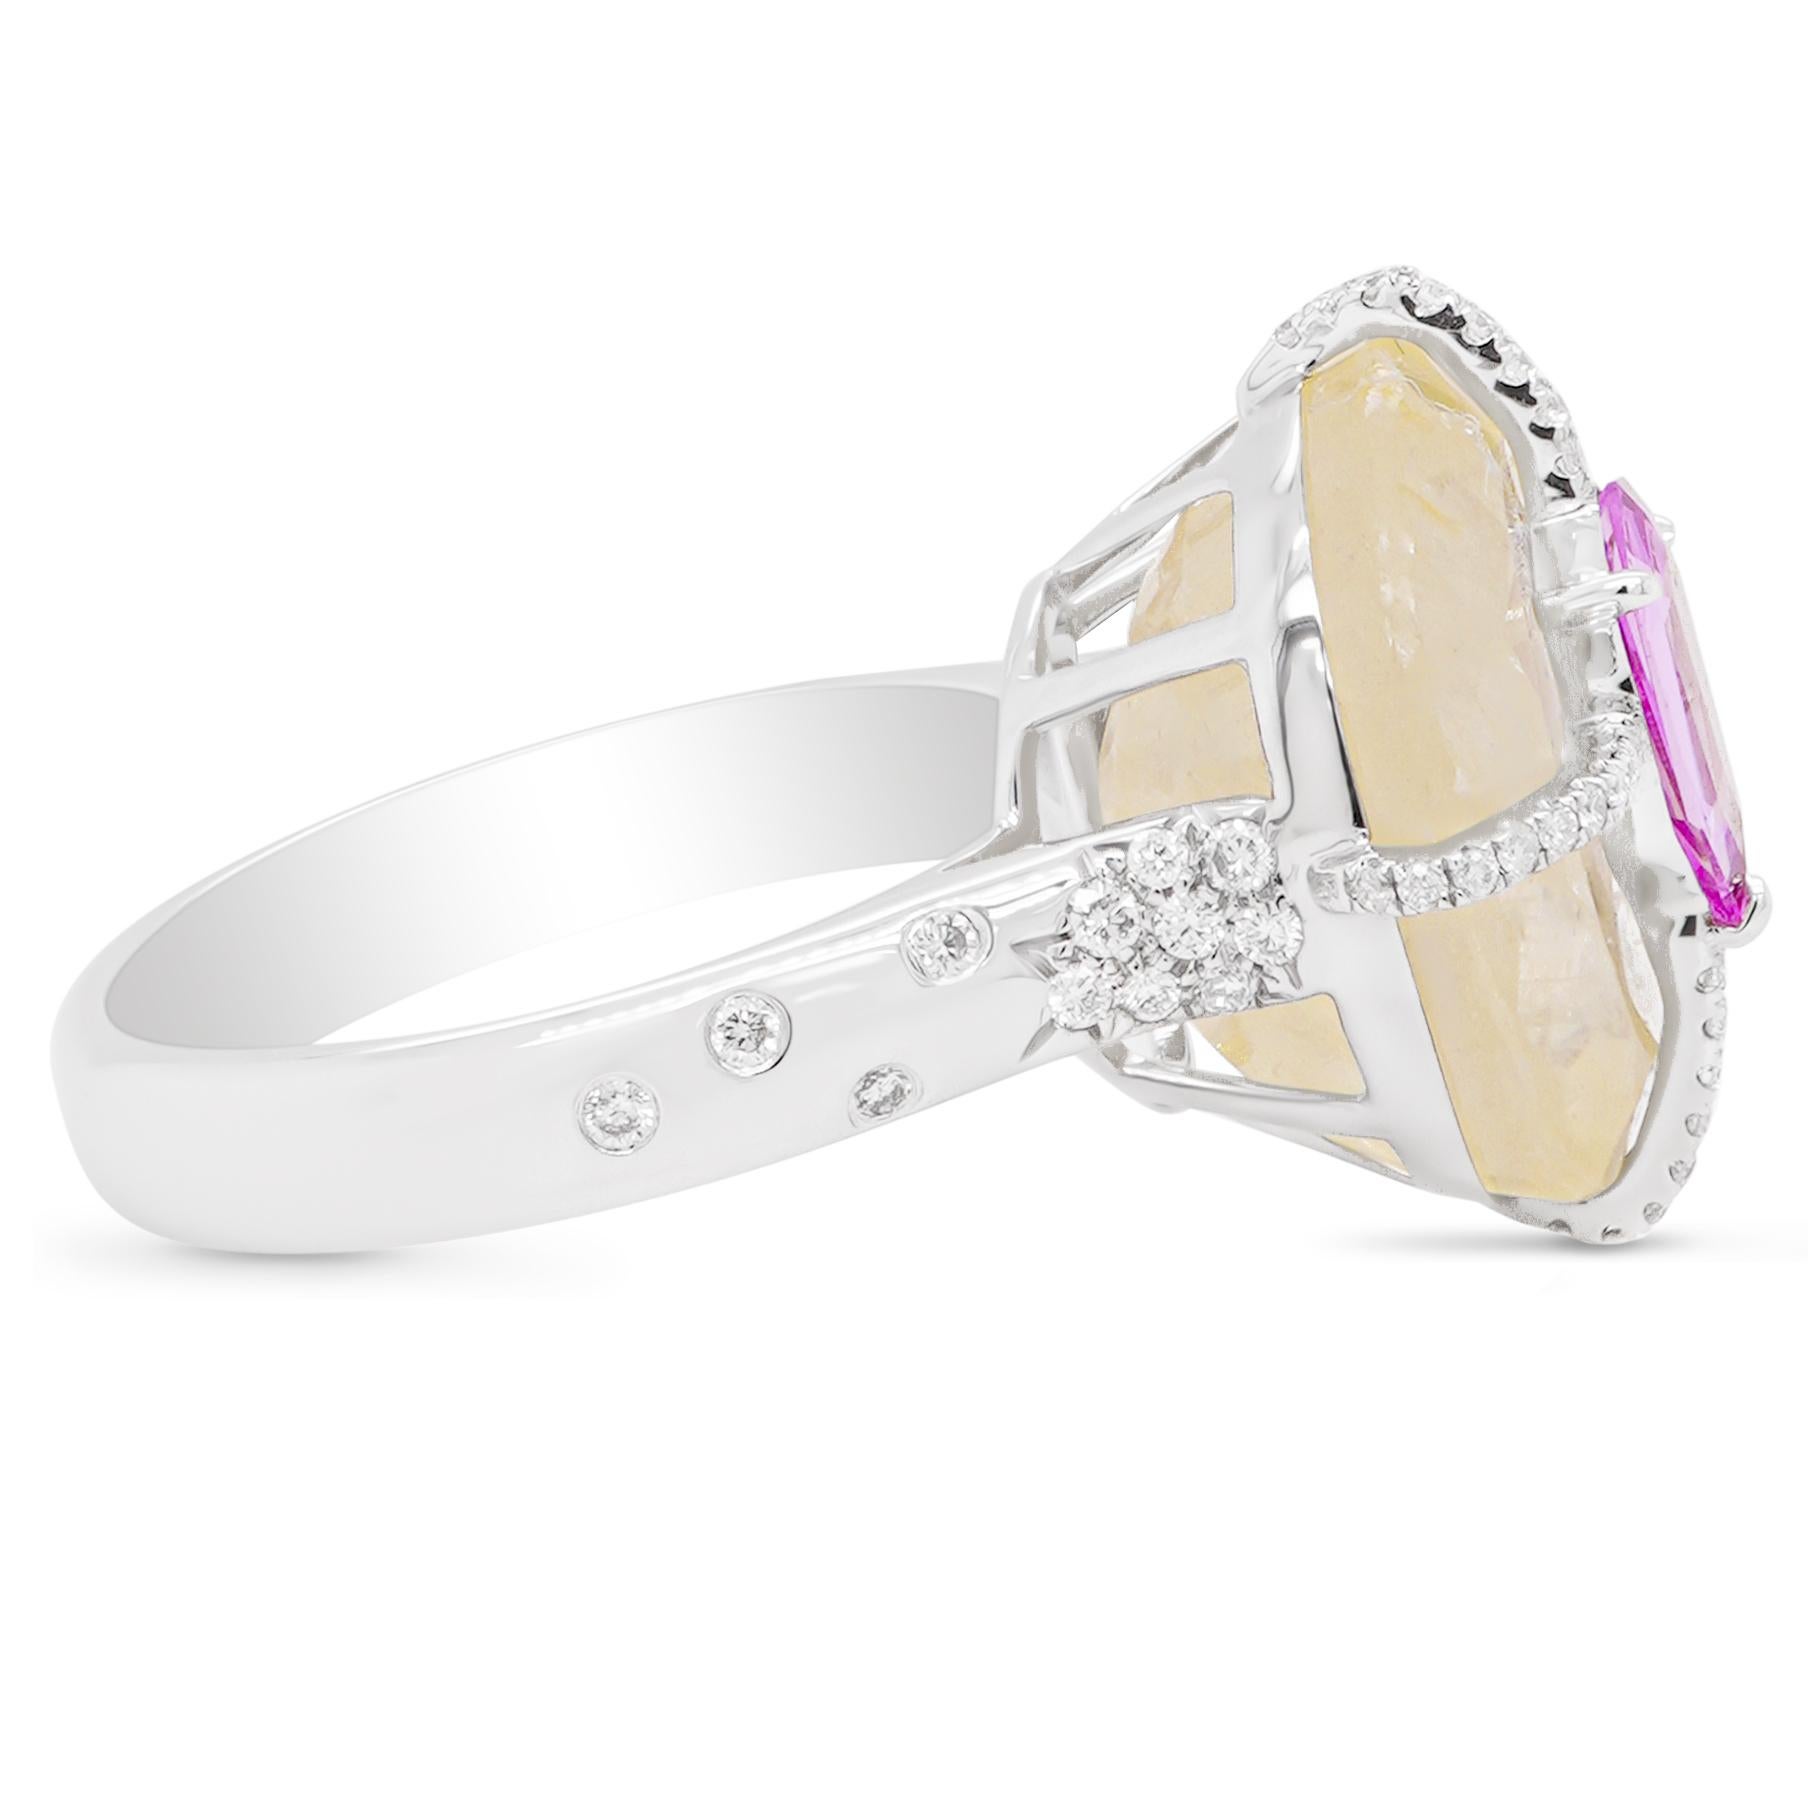 A CGL Certified yellow sapphire is mounted with 0.66 carat Kite shaped Pink Sapphire and 0.26 carat white brilliant round diamond. 